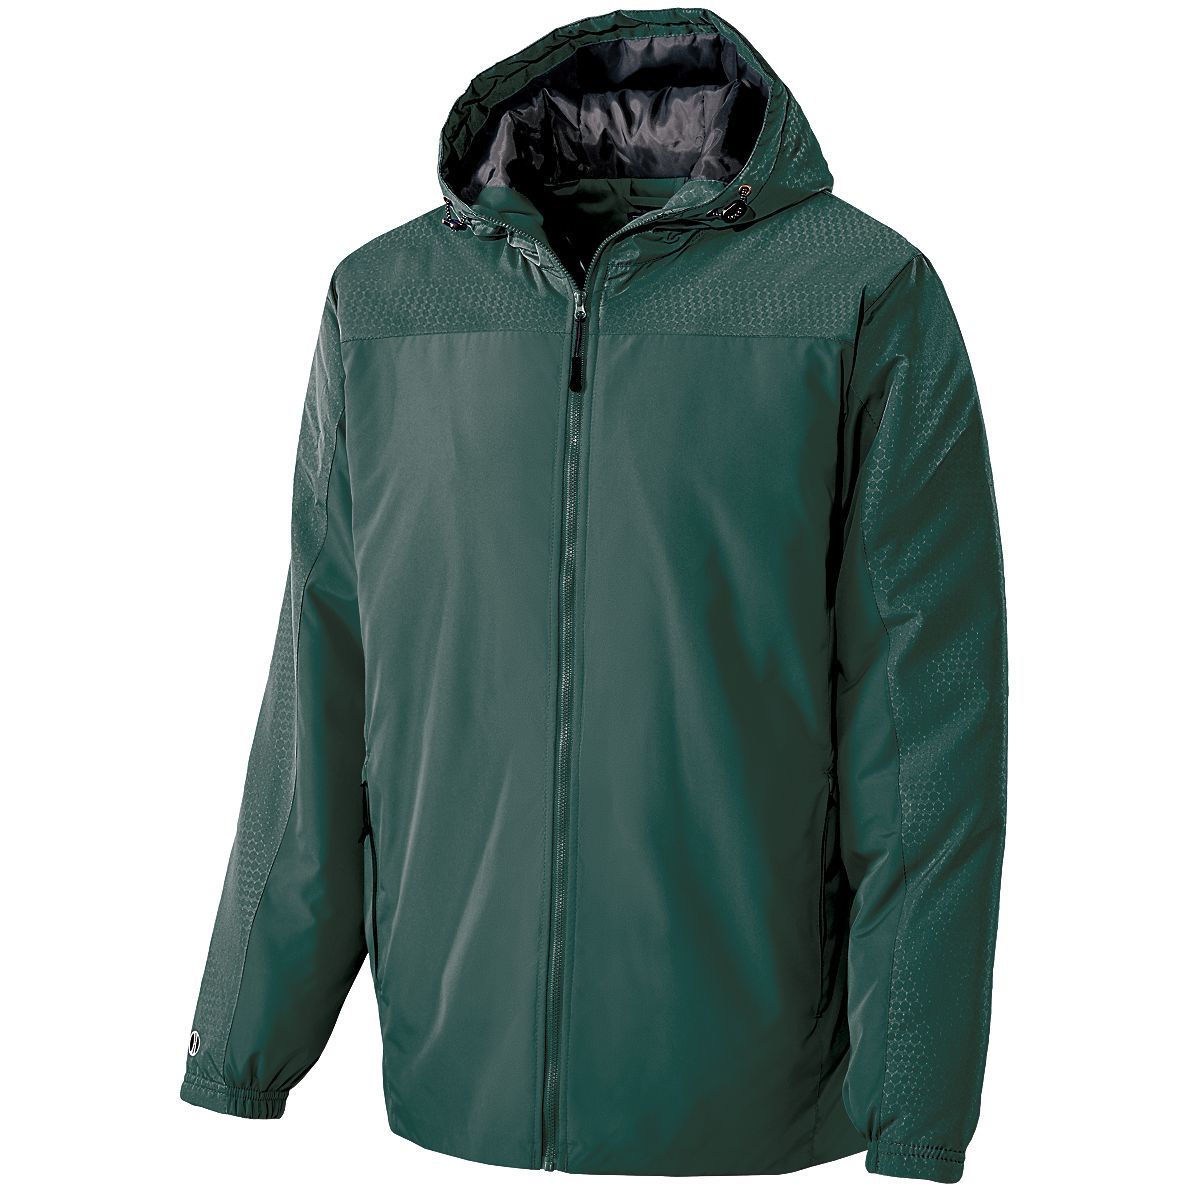 Holloway Bionic Hooded Jacket in Dark Green/Carbon  -Part of the Adult, Adult-Jacket, Holloway, Outerwear product lines at KanaleyCreations.com